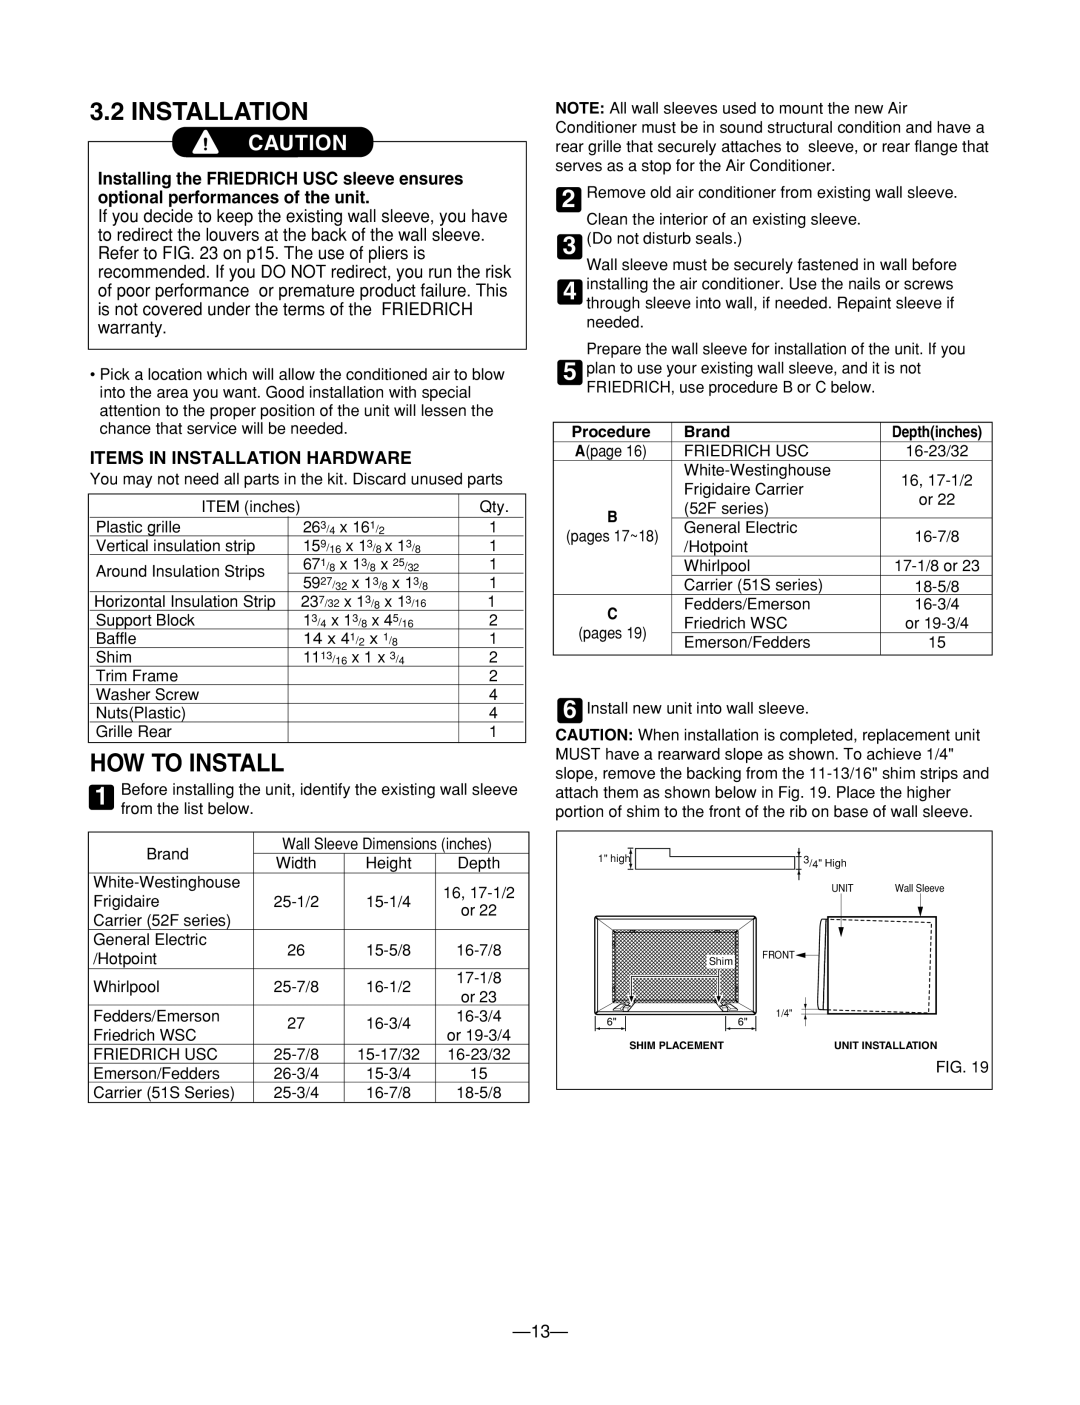 Heat Controller BG-103A service manual 3.2INSTALLATION, How To Install, Items In Installation Hardware, Procedure, Brand 